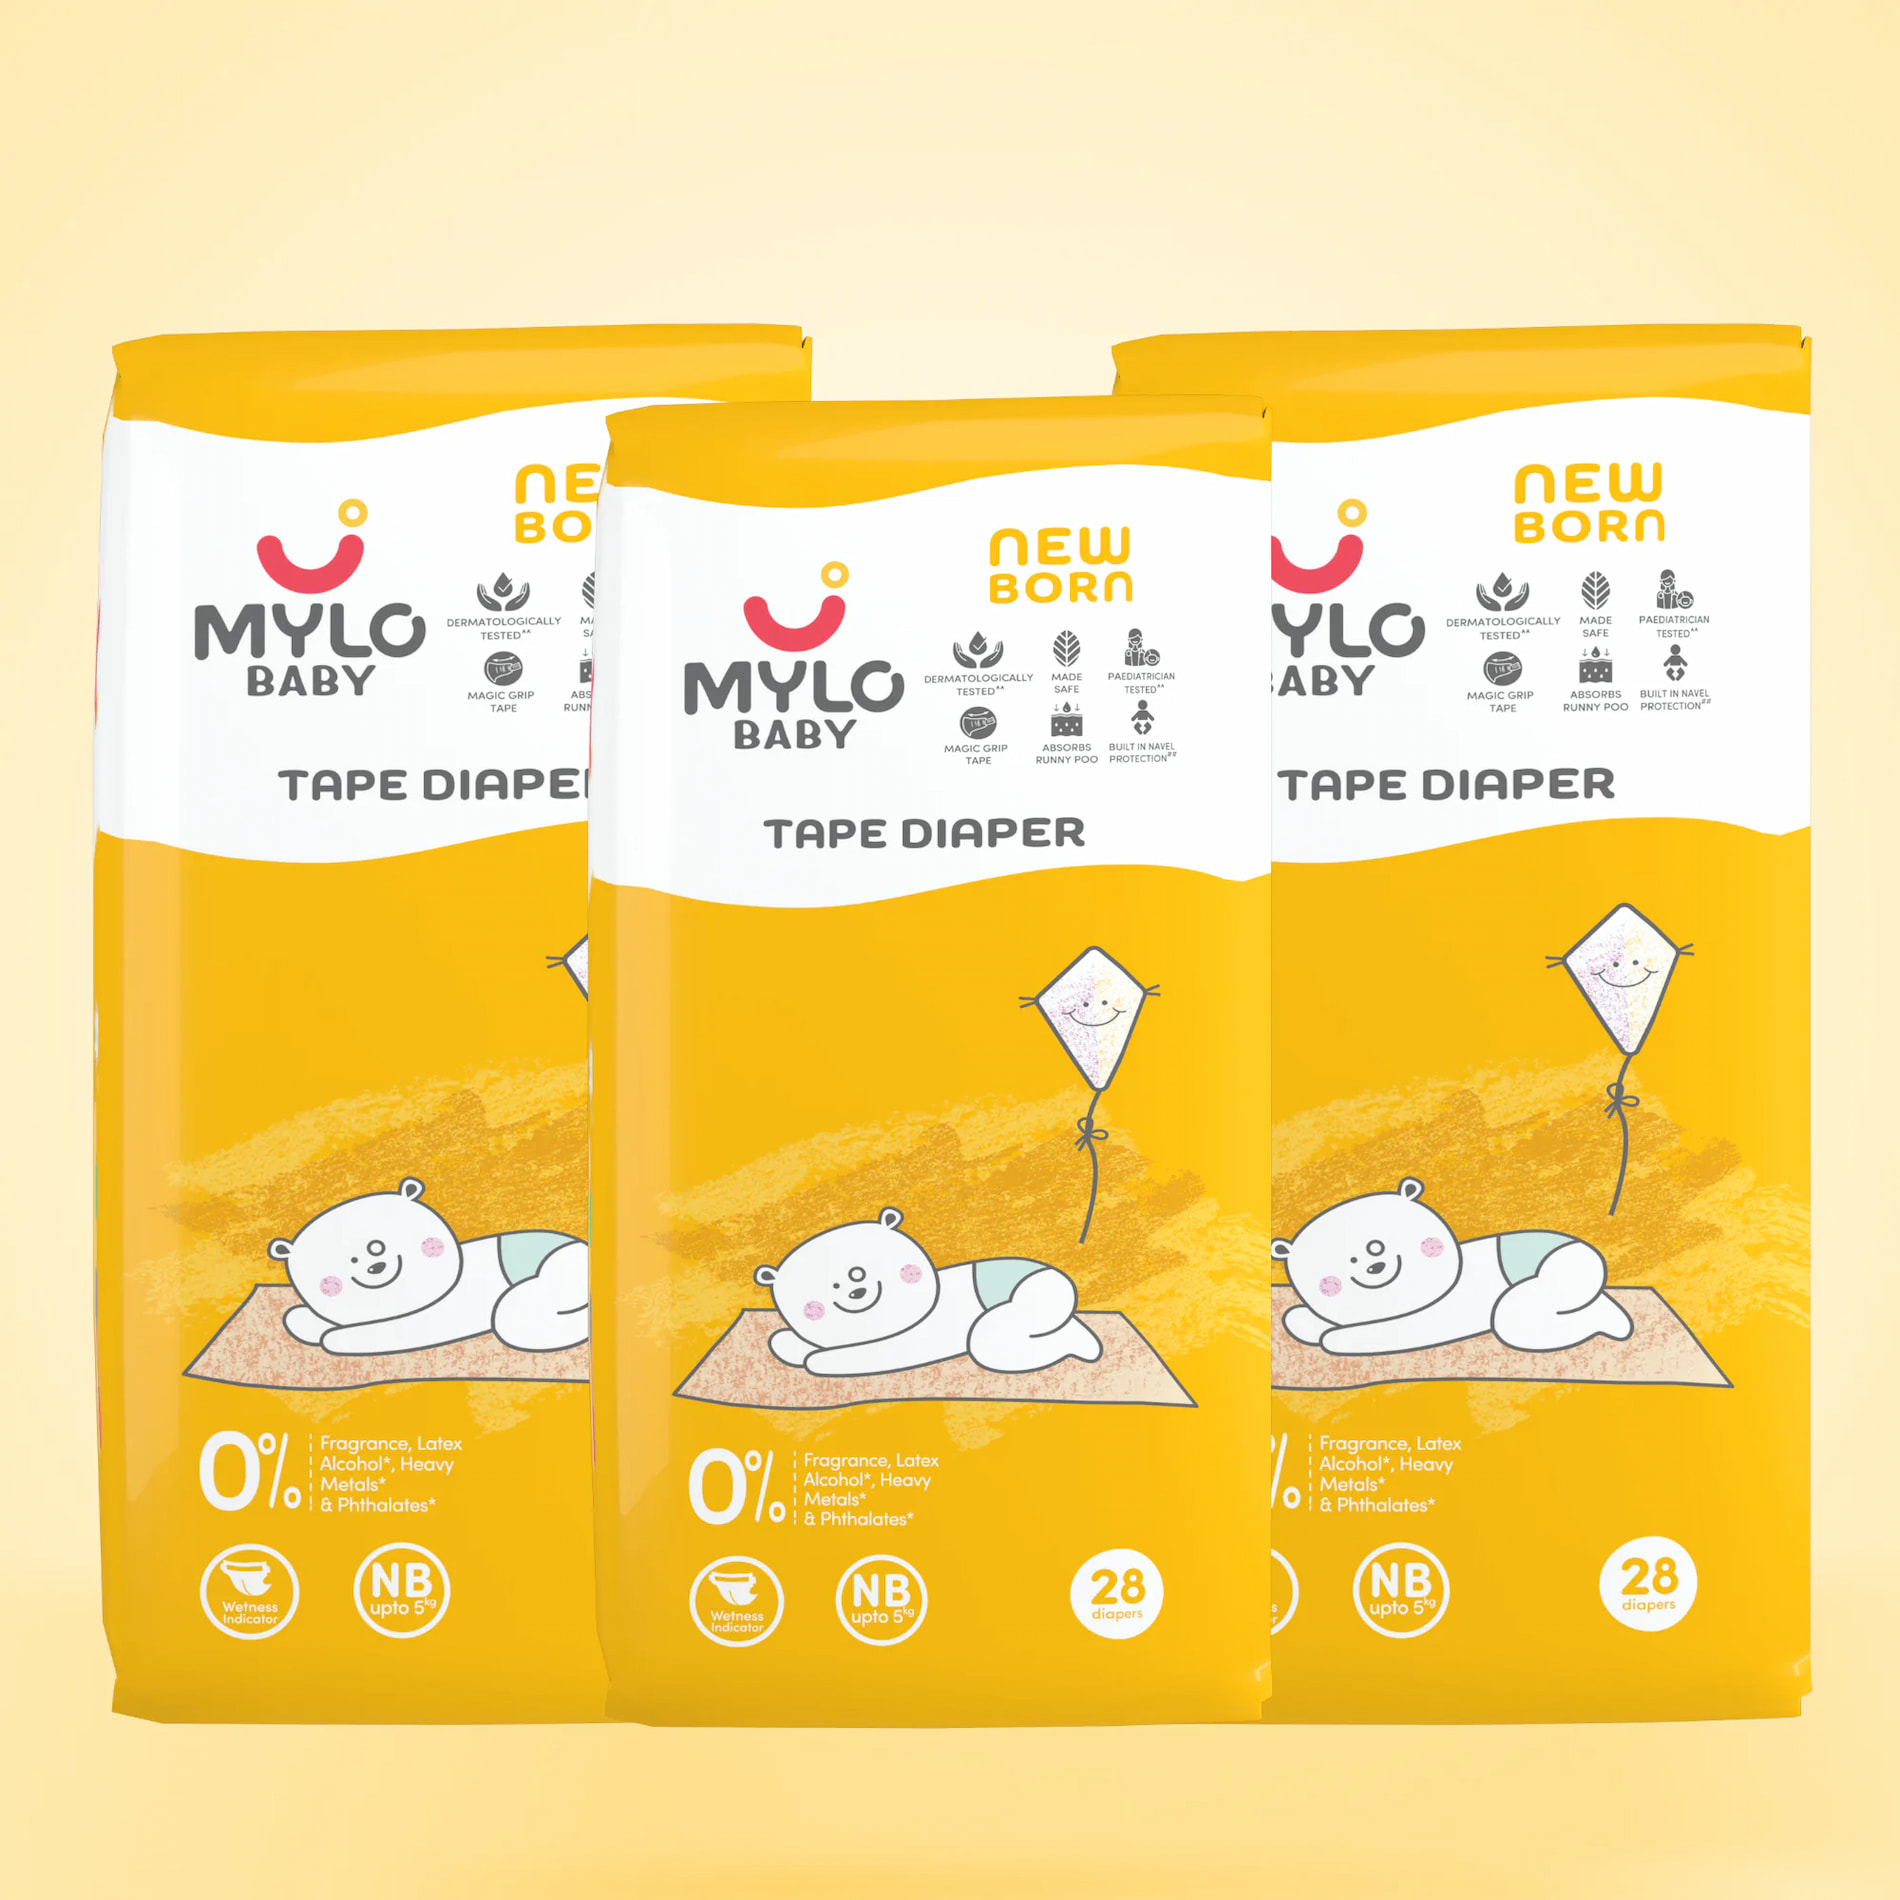 Mylo Baby New Born Tape Diapers | Up to 5Kgs | with Wetness Indicator & Magic Grip Tape | 28 Count - Pack of 3 